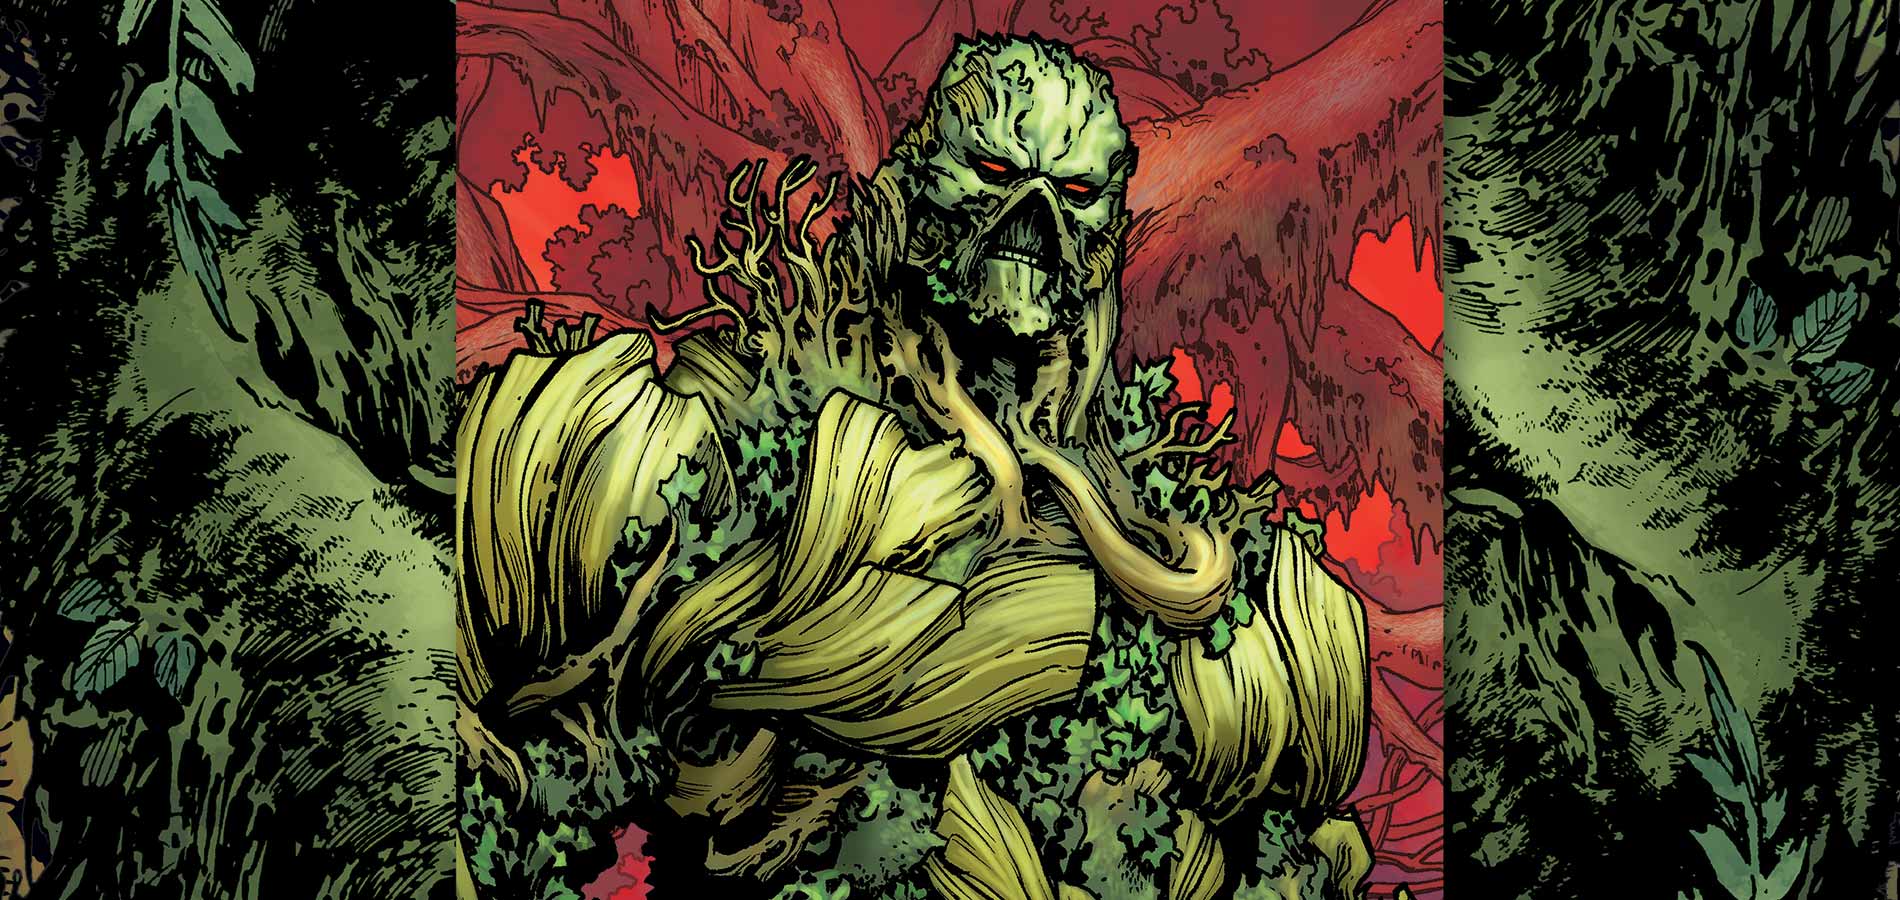 Swamp Thing wallpapers, Comics, HQ Swamp Thing pictures.